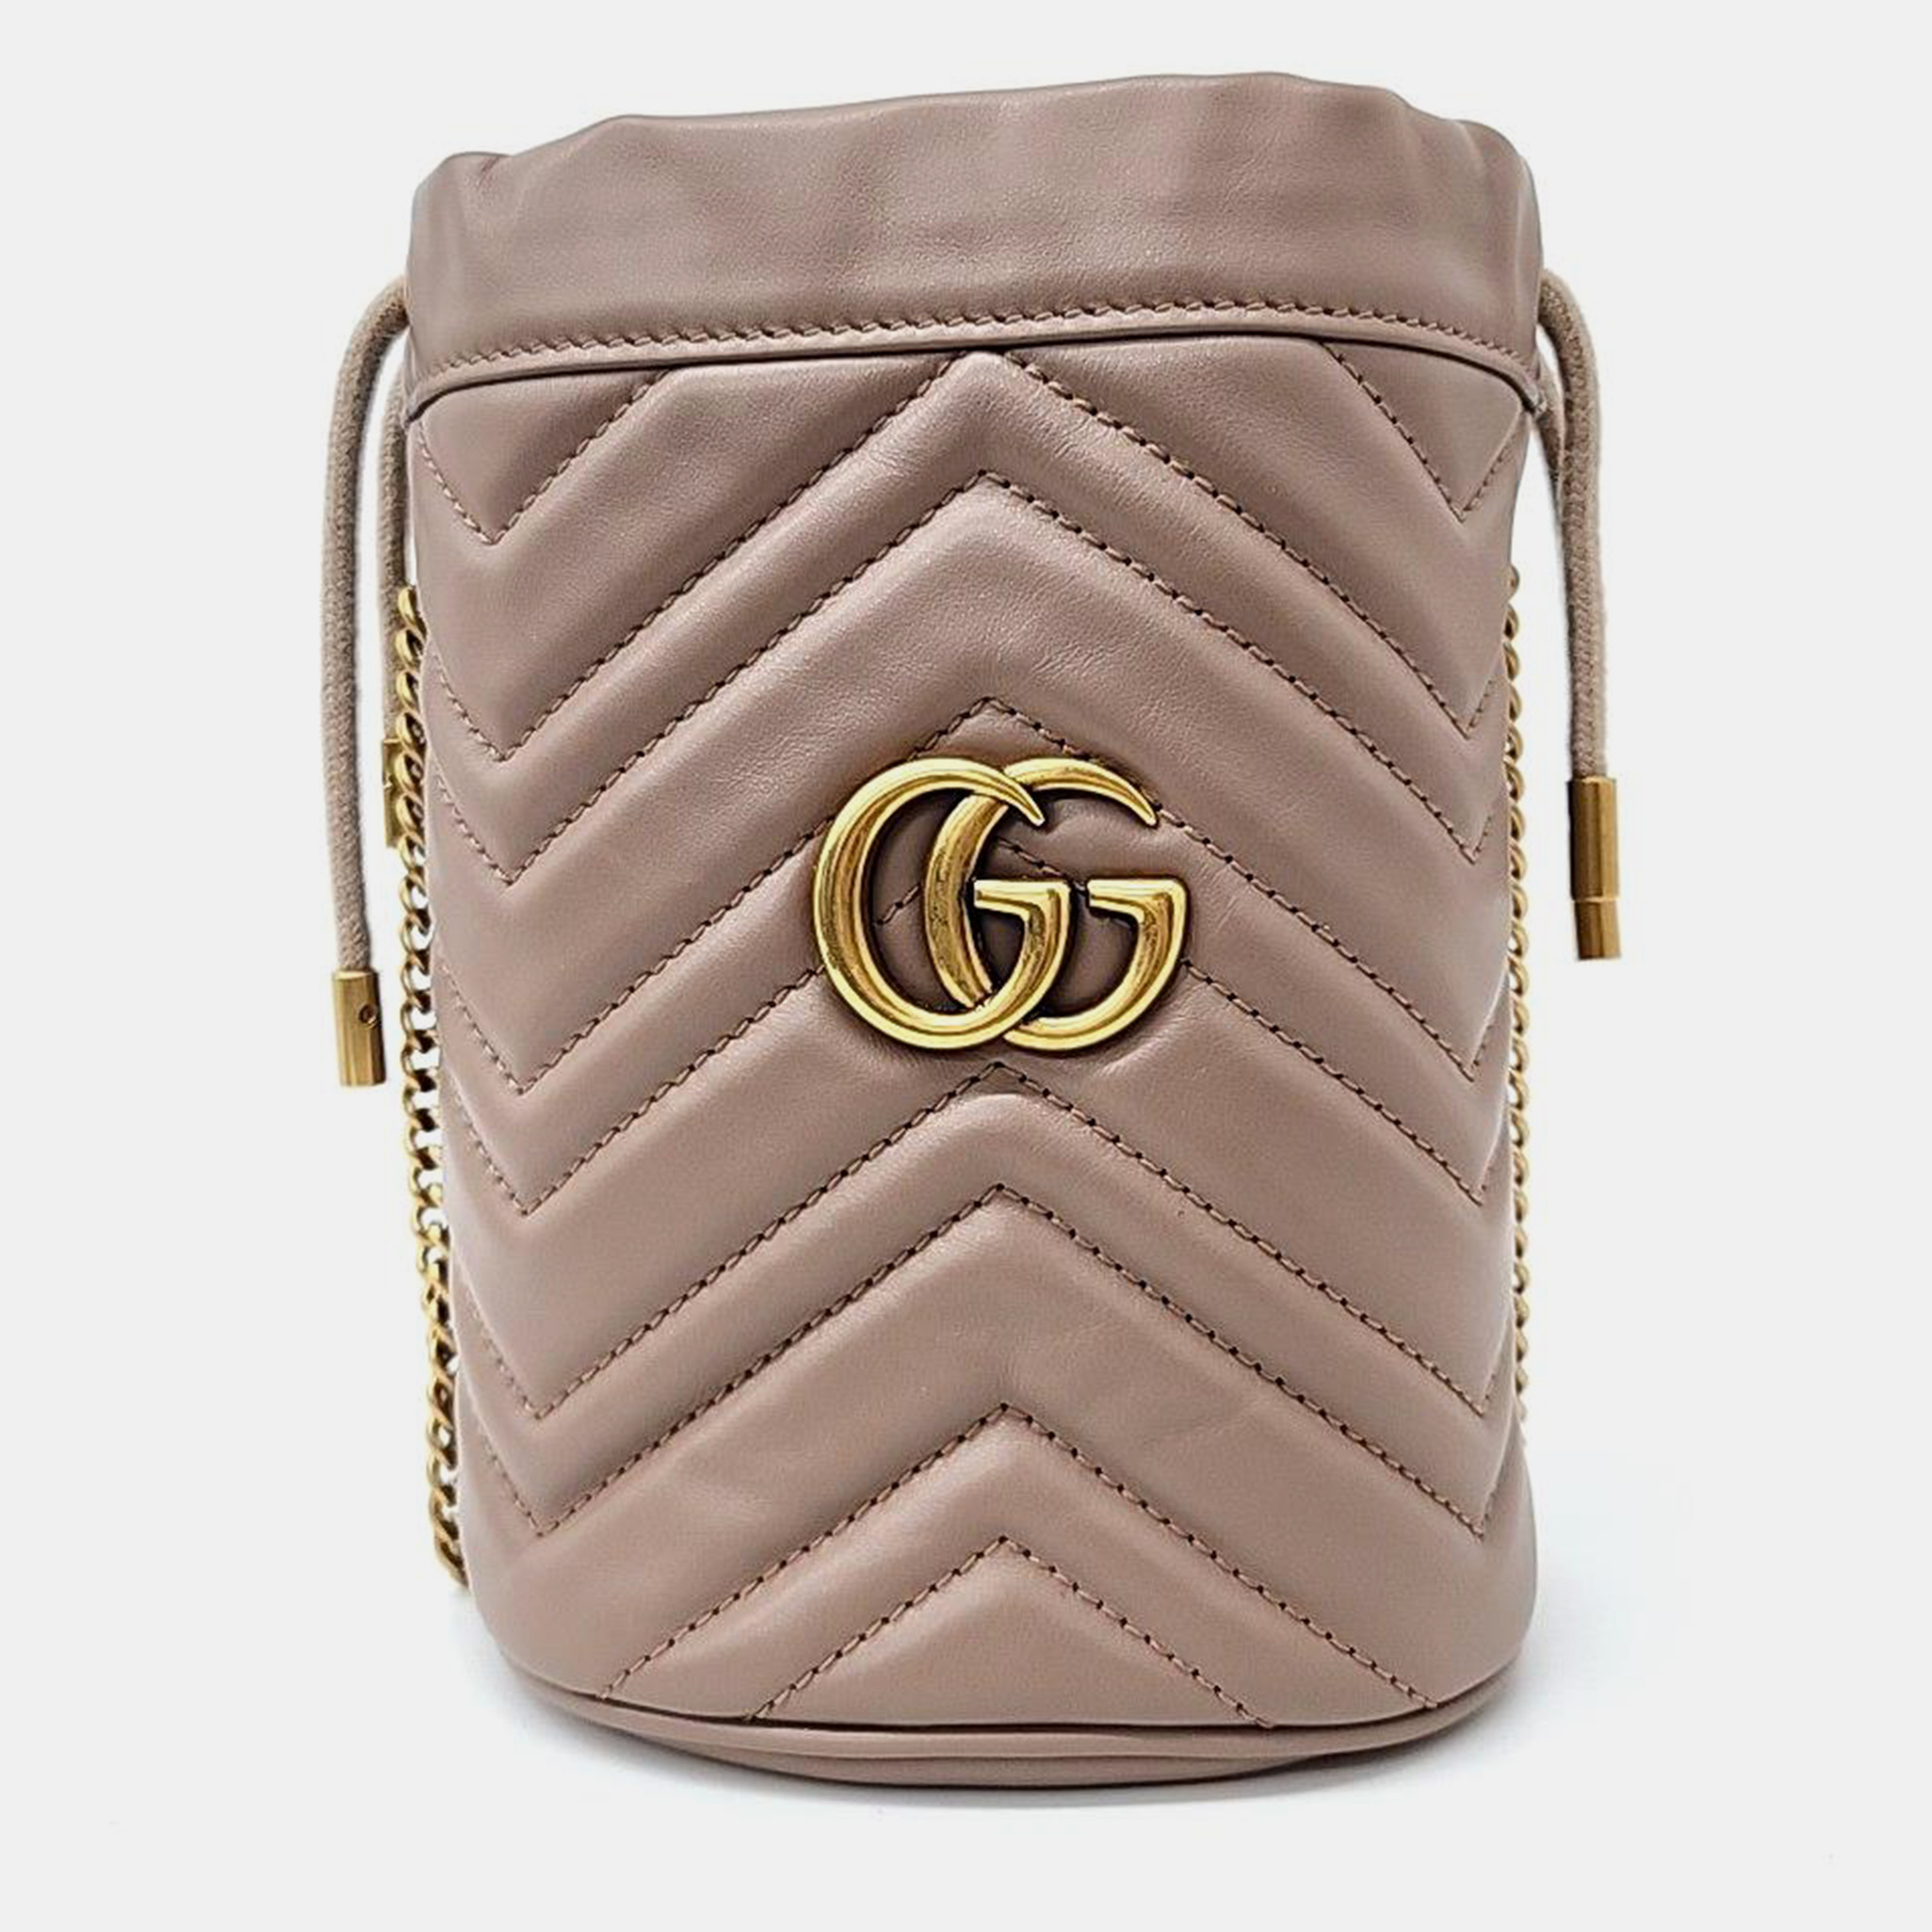 Gucci pink leather gg marmont mini bucket bag